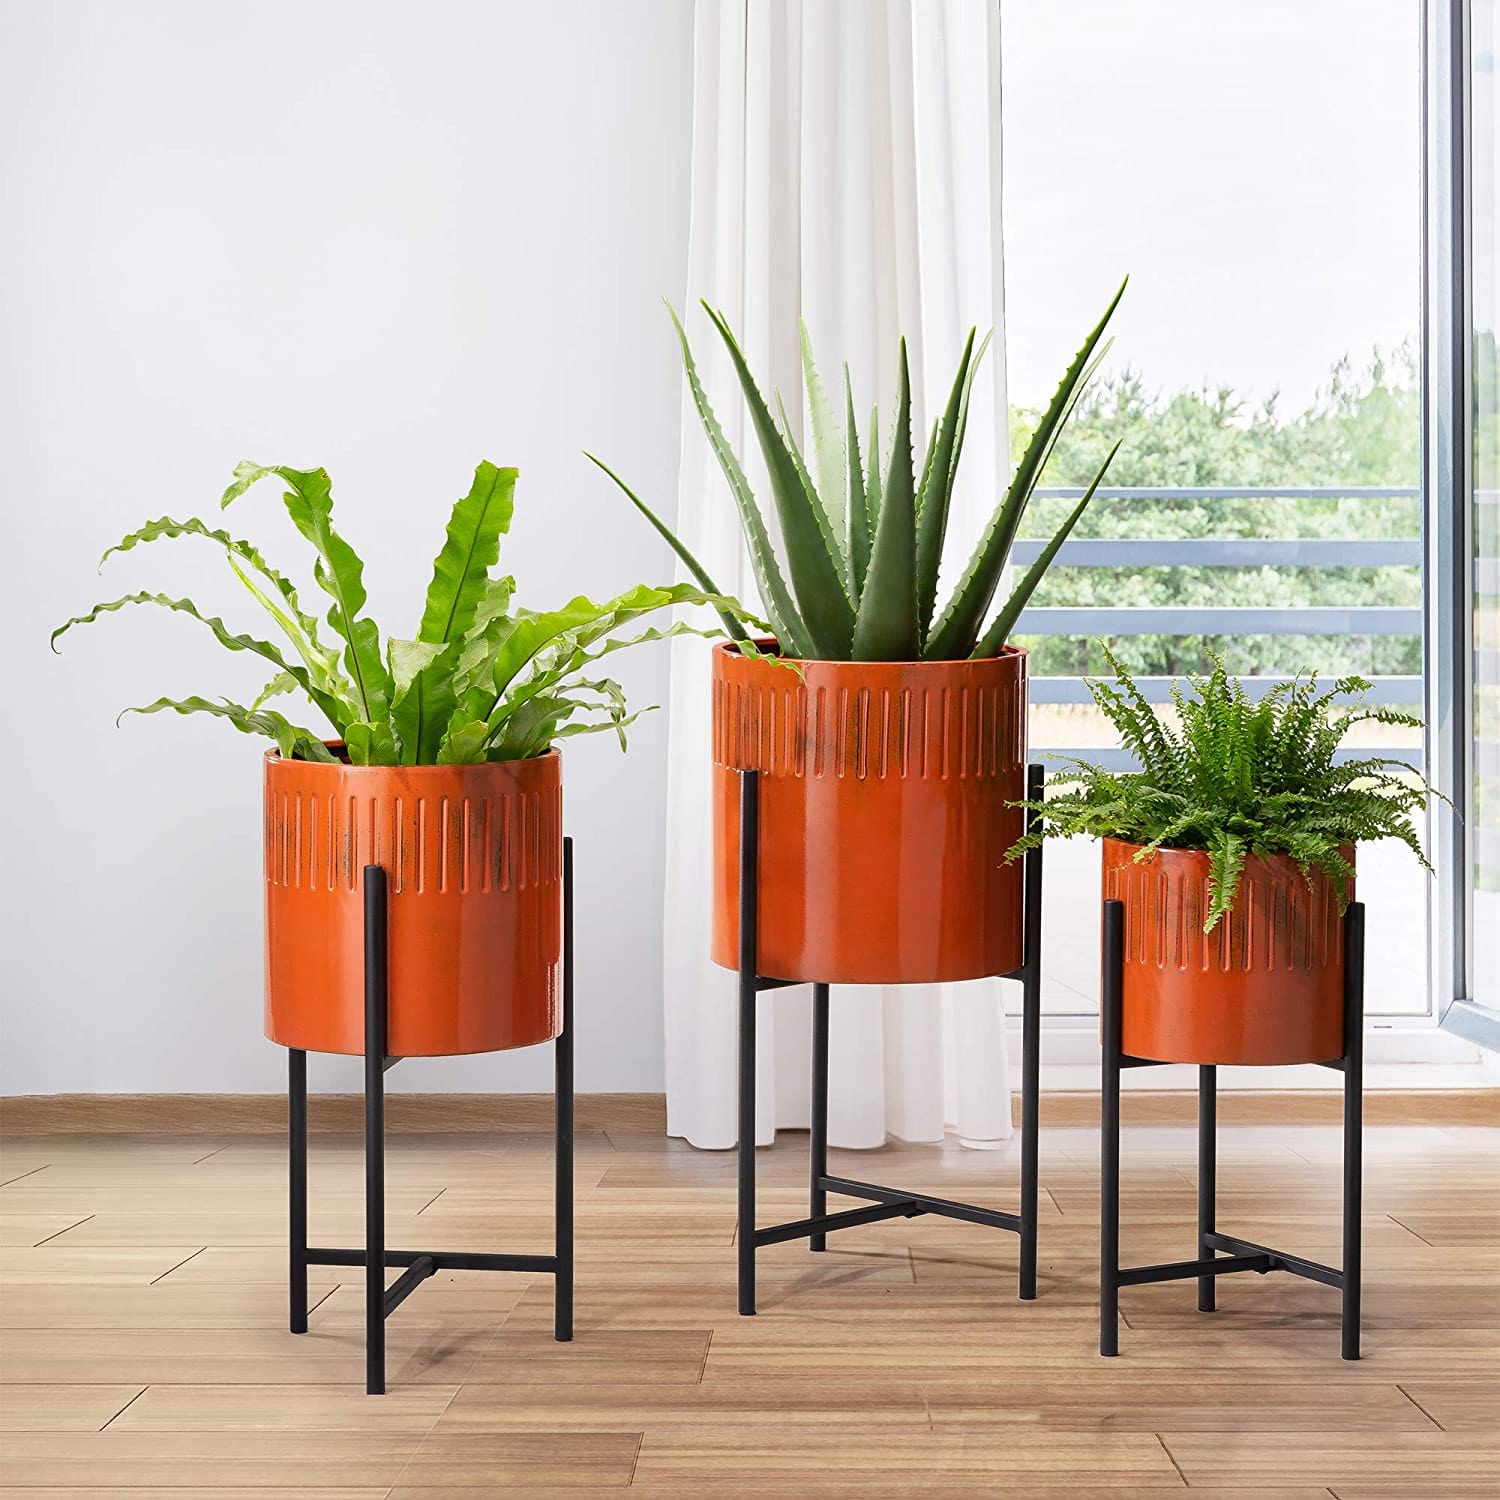 Set of 3 Modern Metal Planter Pots with Mid Century Planter Holders Perfect for Indoor and Outdoor Plants, Non-Adjustable Plant Stand